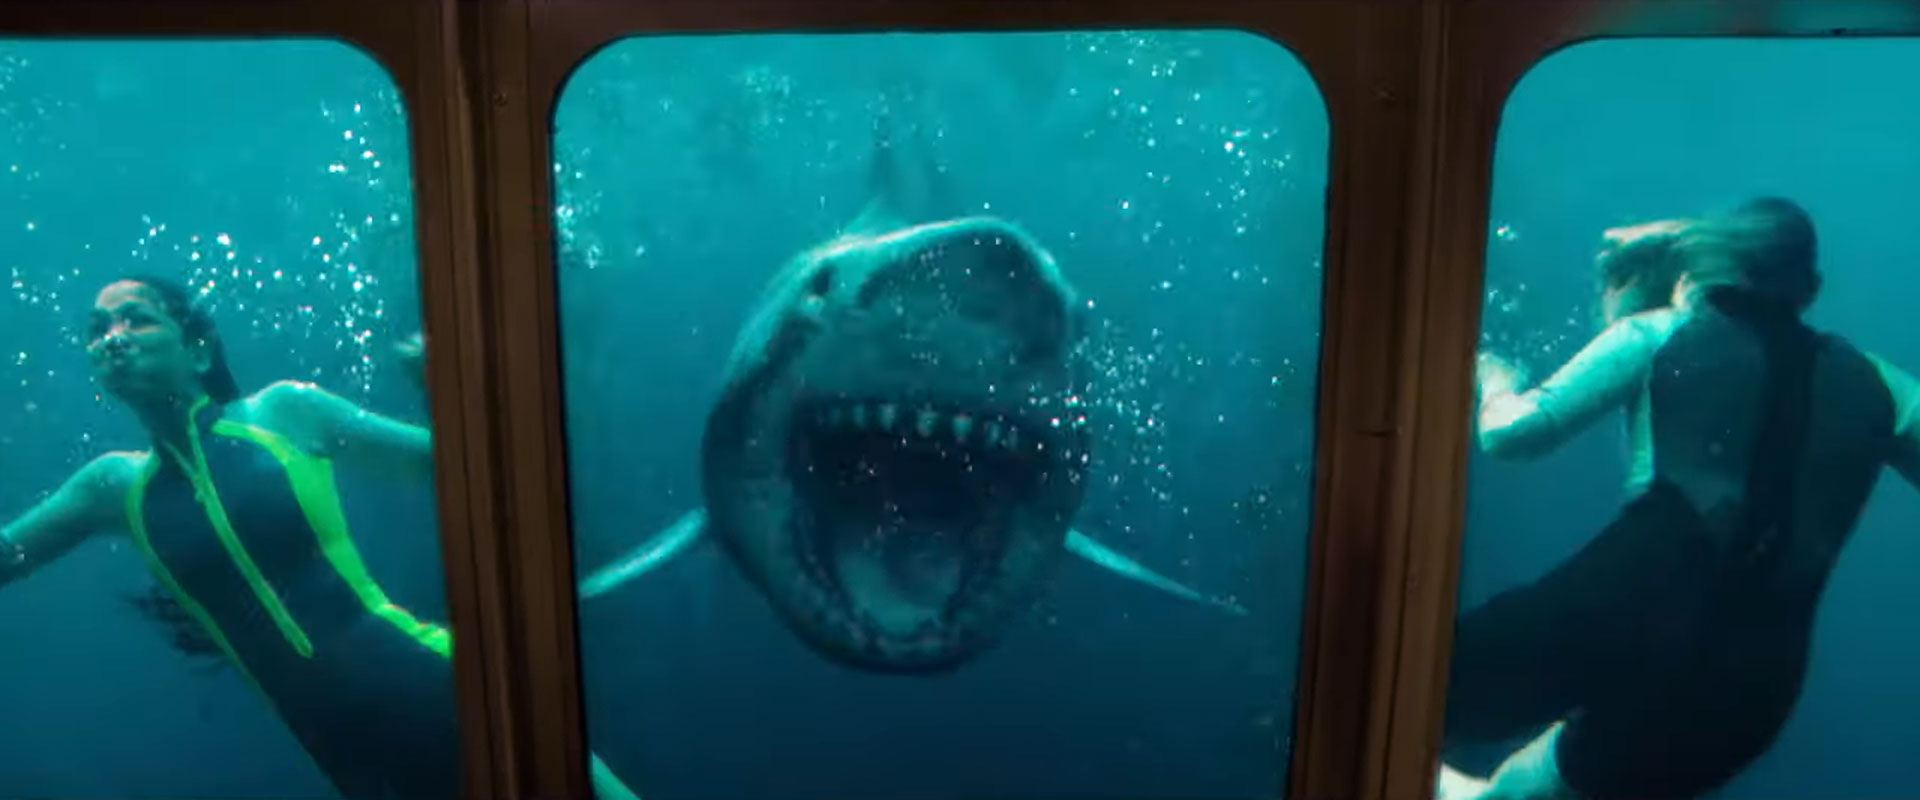 47 Meters Down: Uncaged Trailer